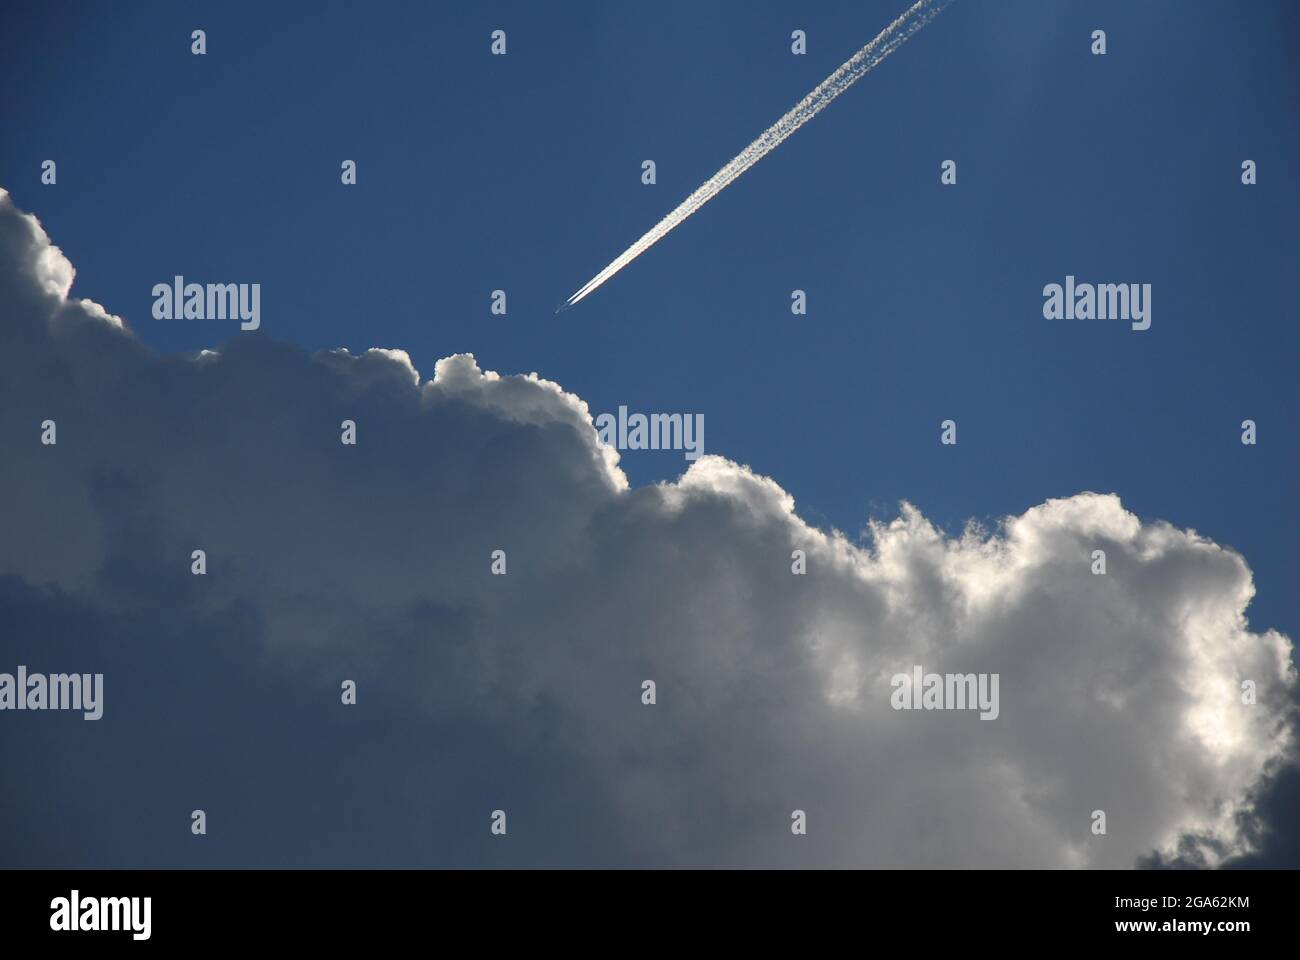 Storm clouds, sky, blue, air, summer, spring, summertime, white airplane trace, Stock Photo